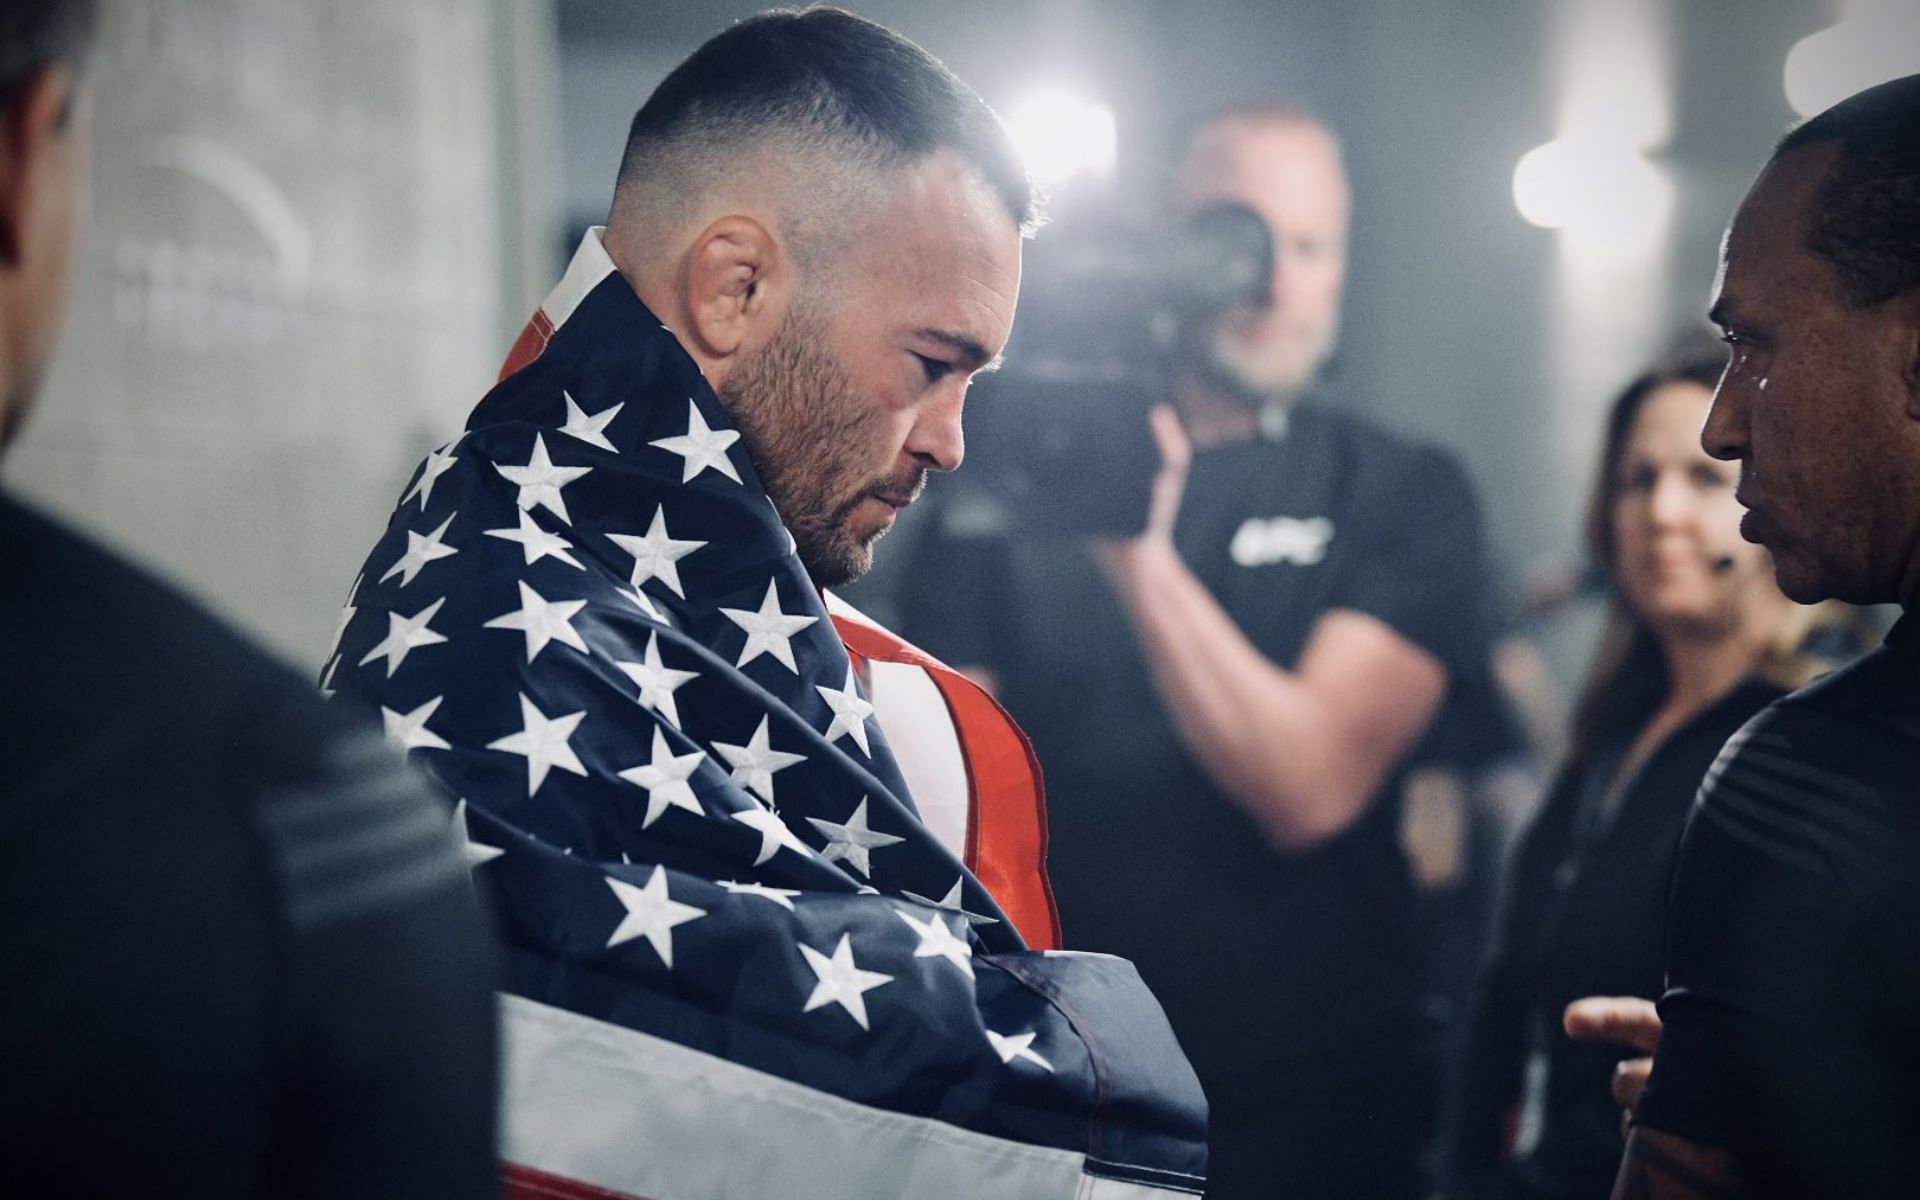 Colby Covington has been called out again by rival Belal Muhammad [Image Credit: @ColbyCovMMA on Twitter]